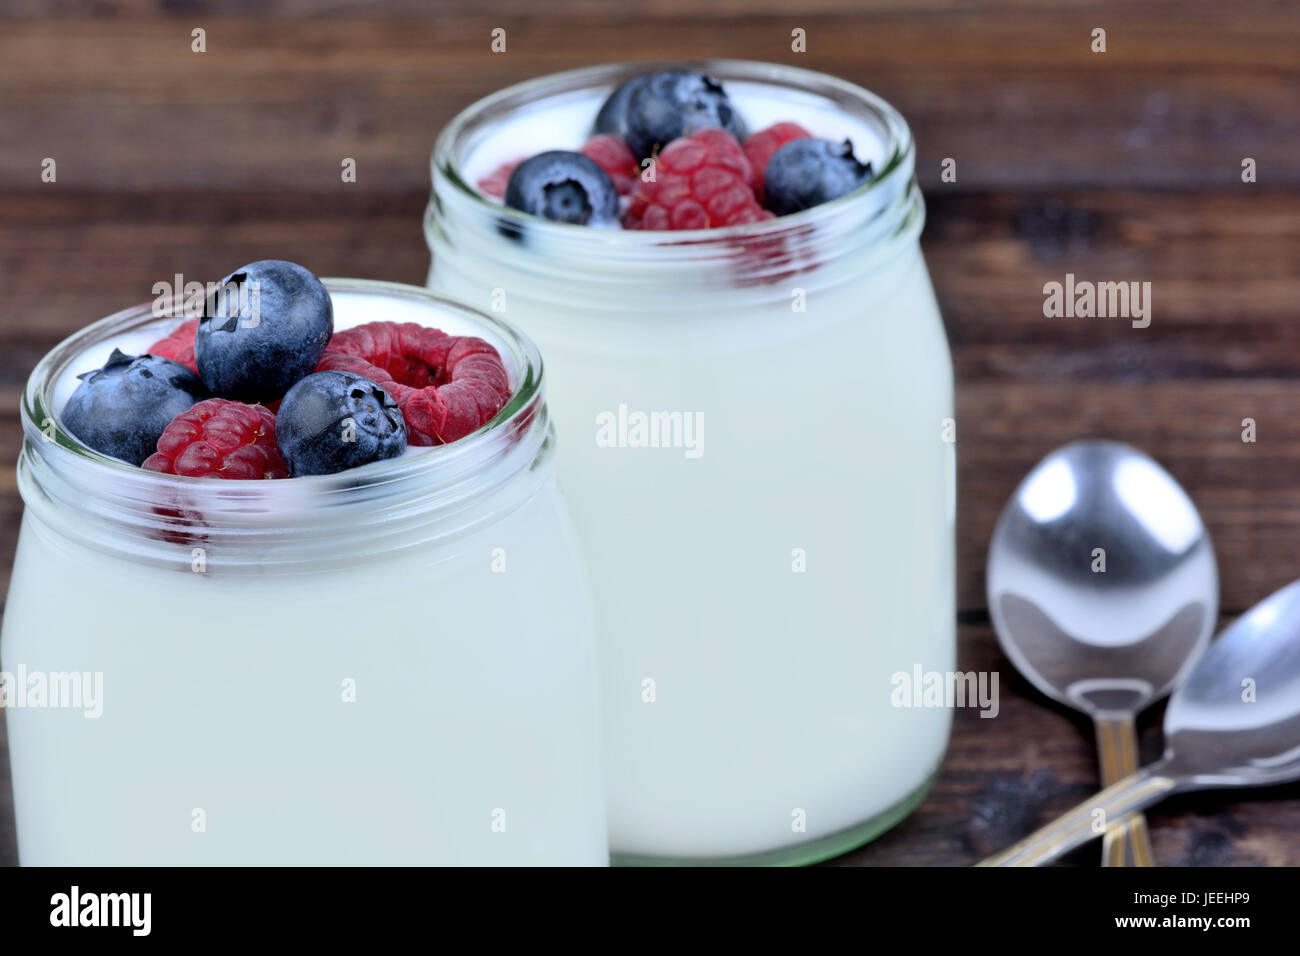 Jars with yogurt ans assorted berries on table close-up Stock Photo